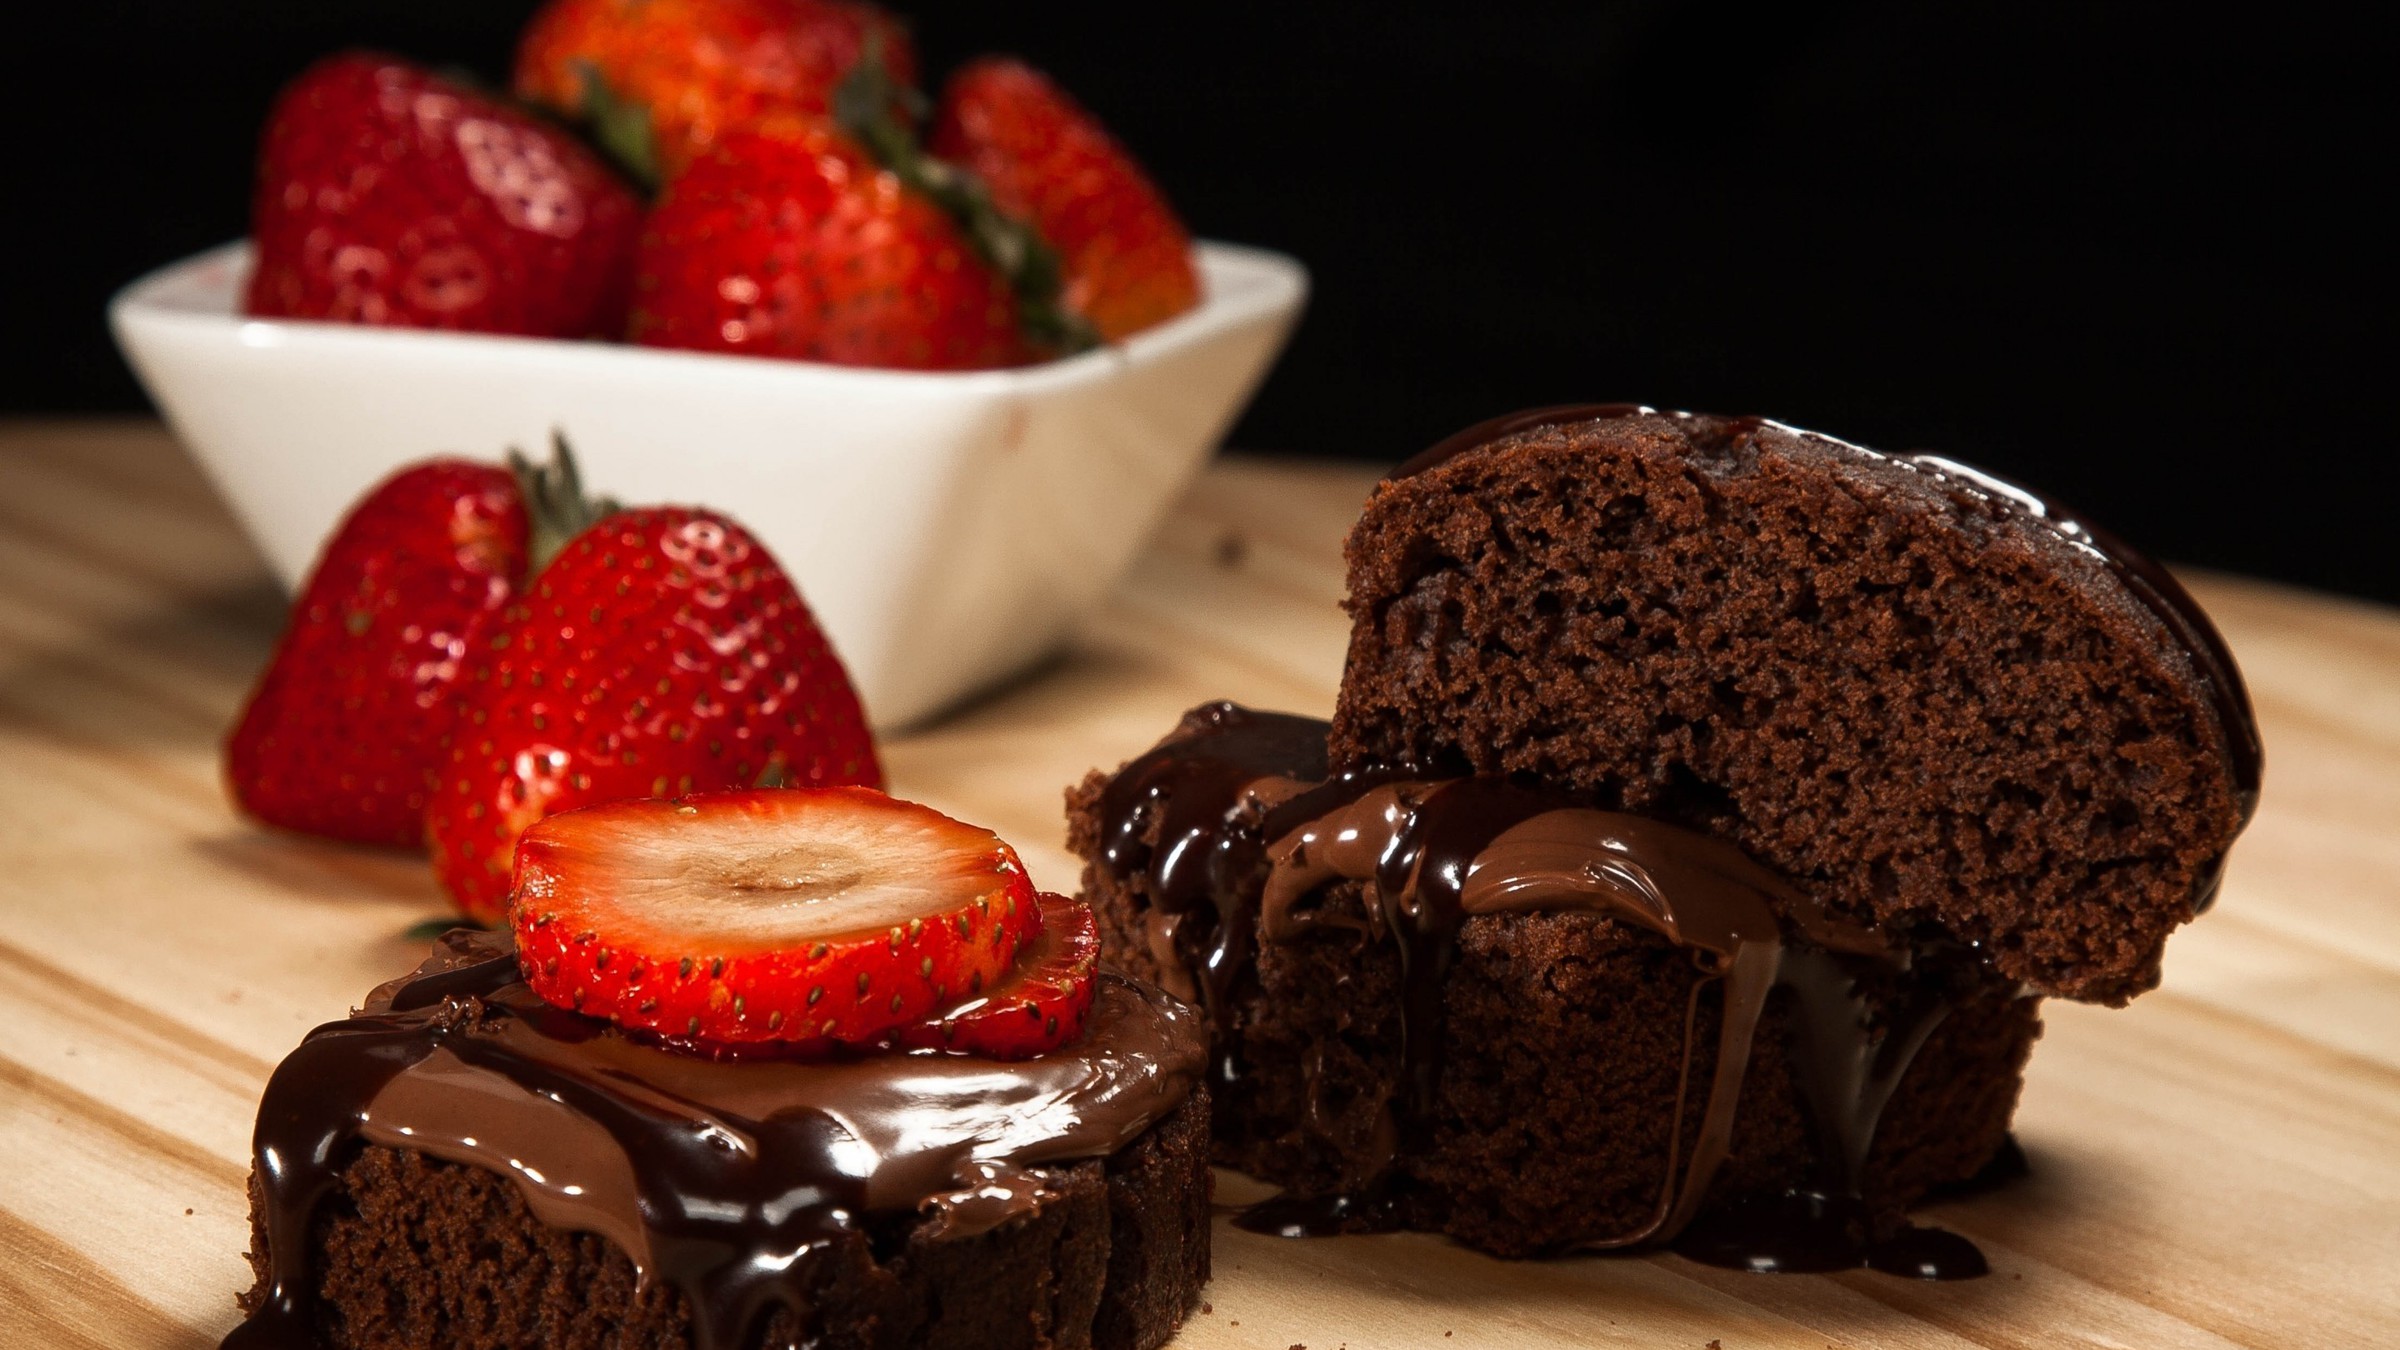 Wallpaper Resolutions - Chocolate Cake With Strawberry , HD Wallpaper & Backgrounds